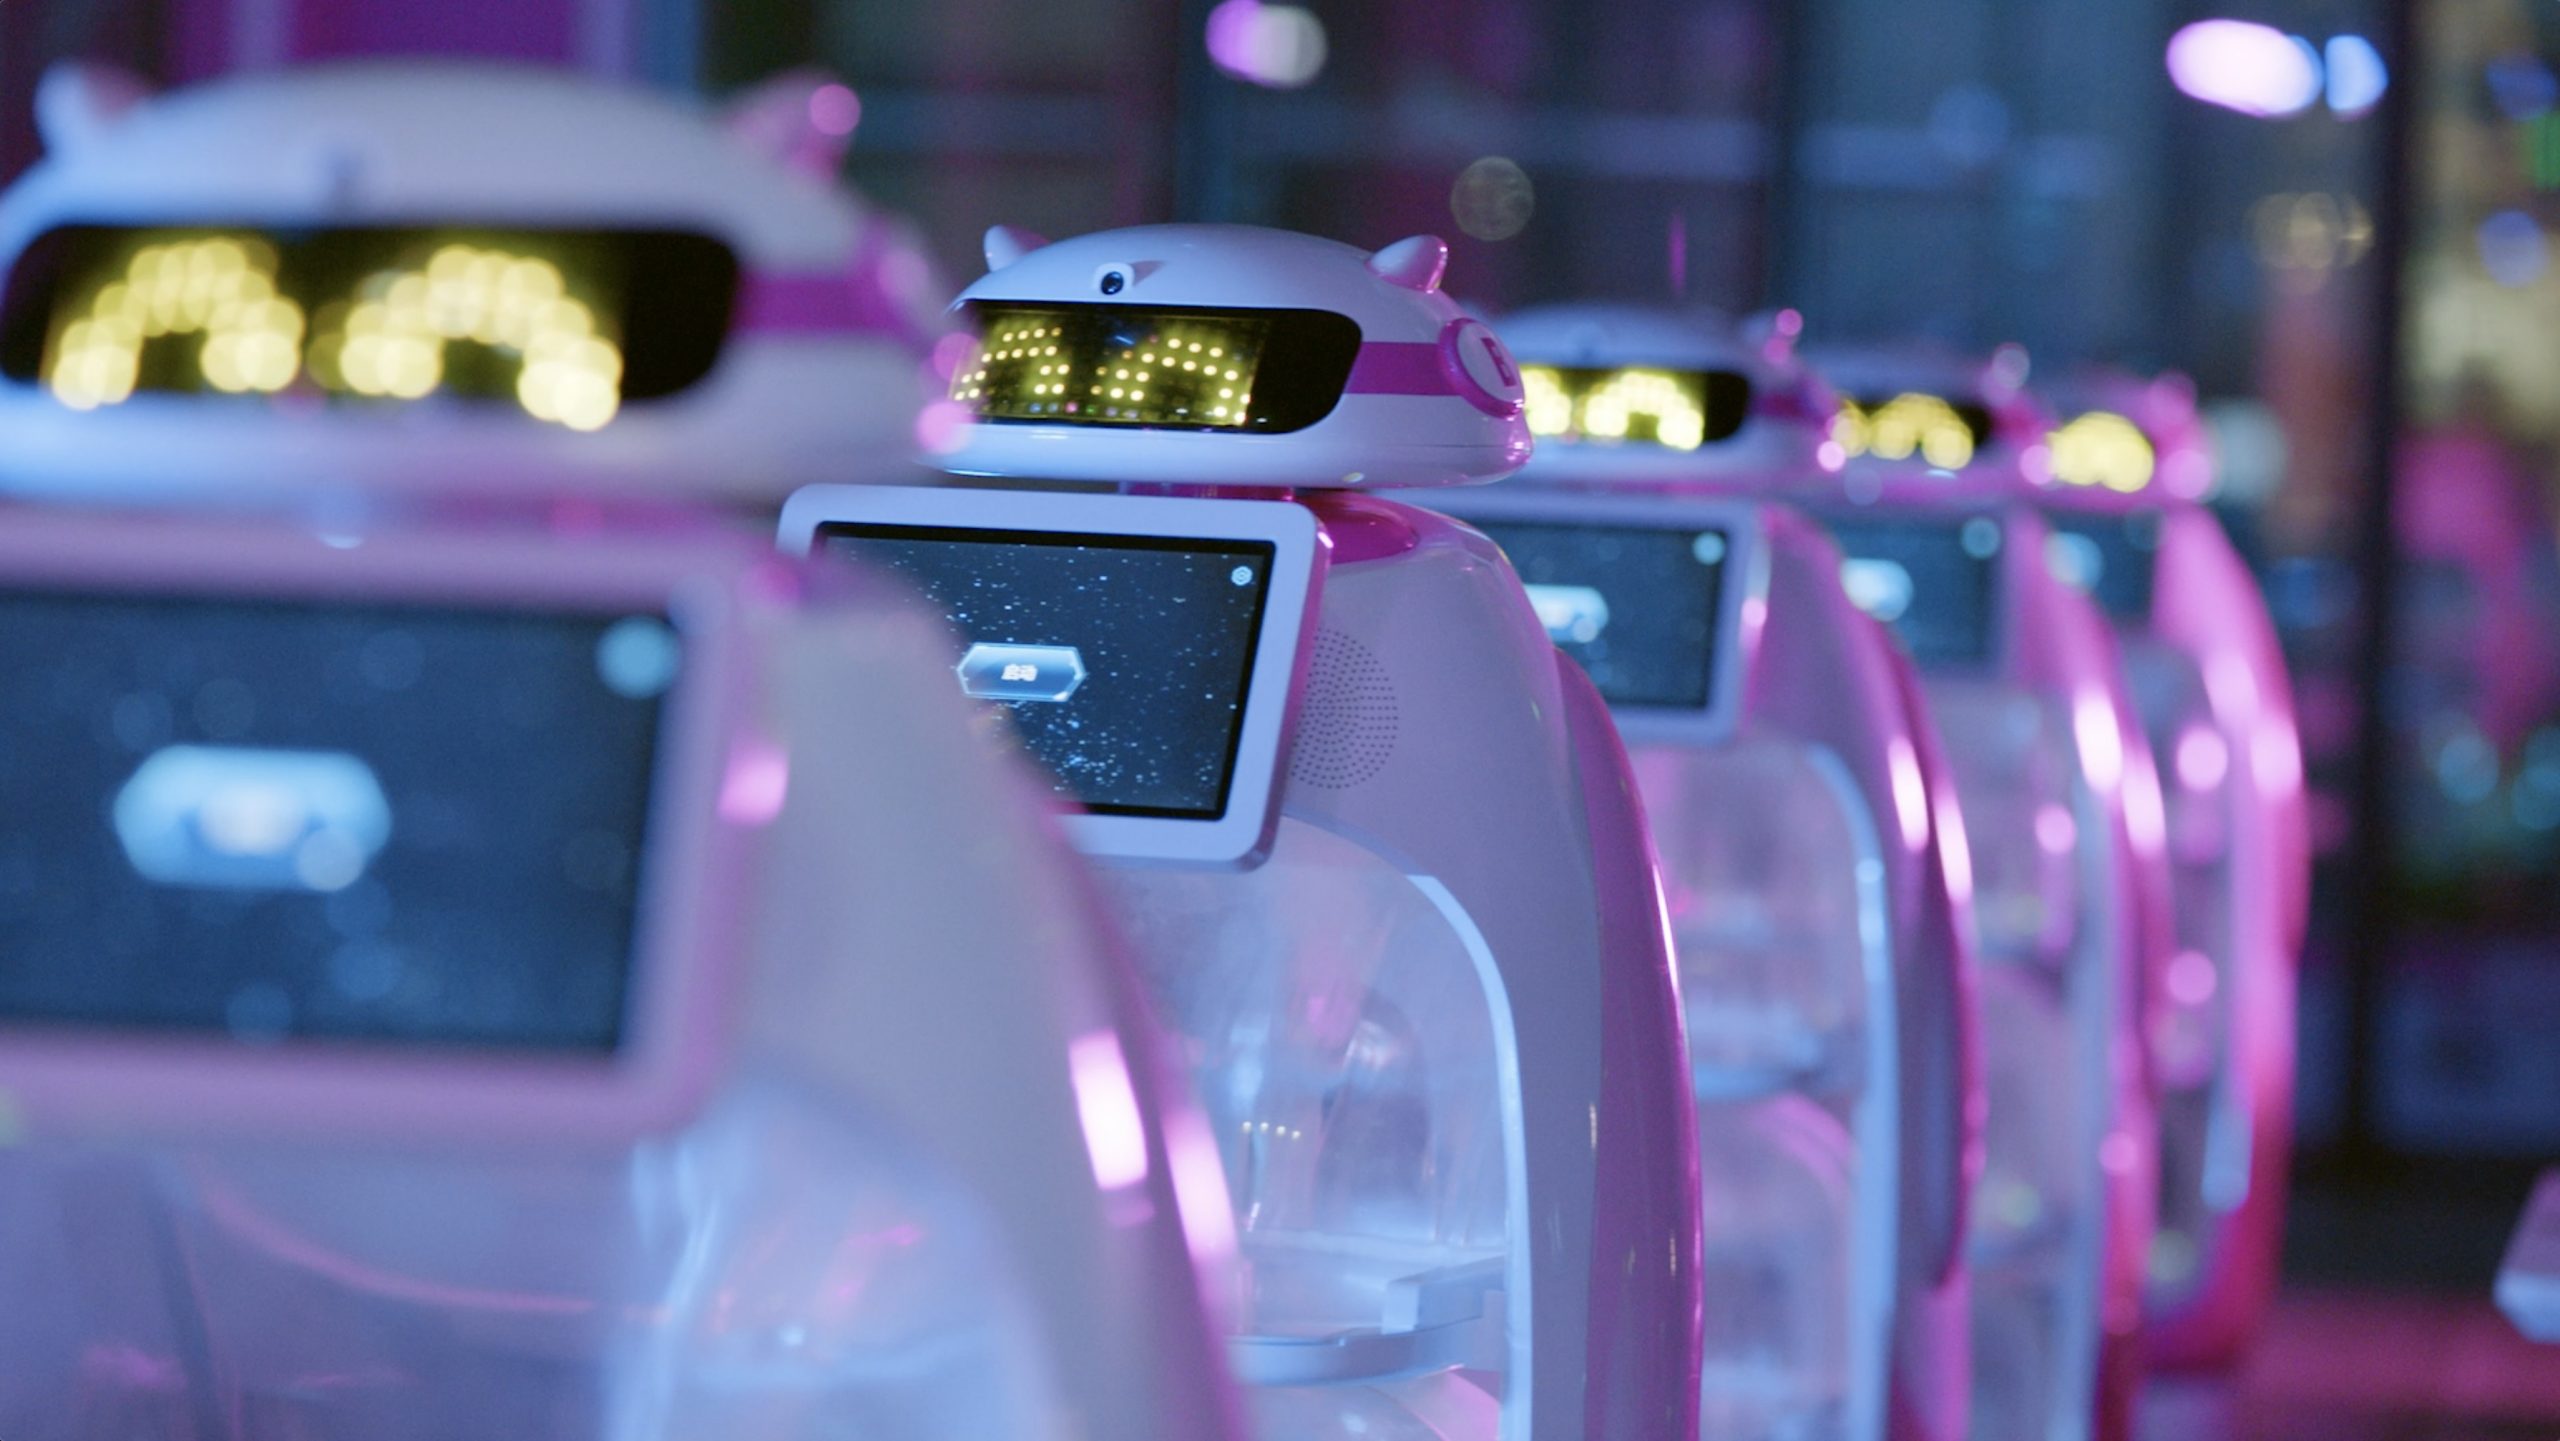 Country Garden Builds the World's First-ever Robot Restaurant Complex in Guangdong, China